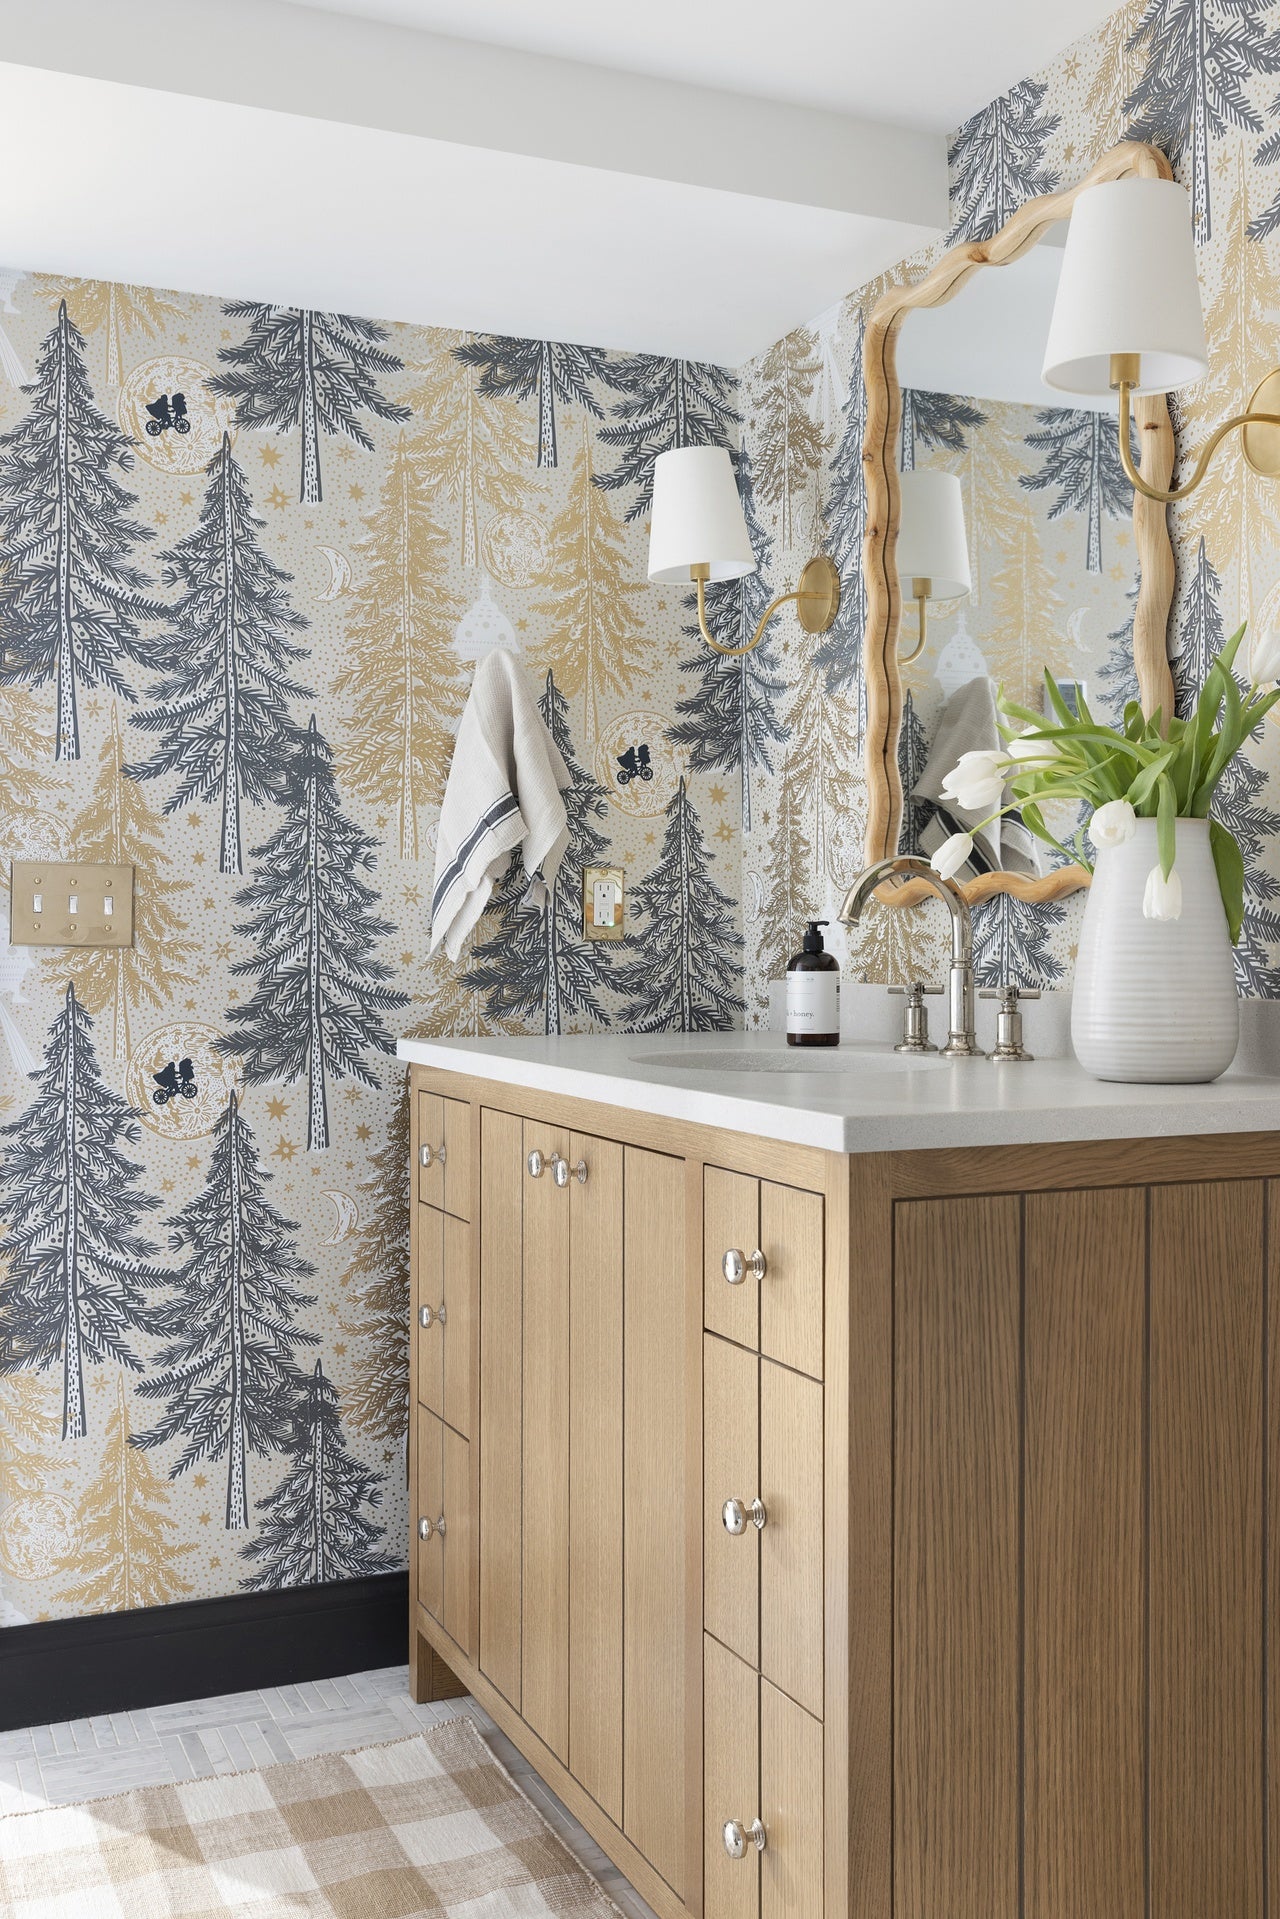 Be Good Wallpaper in a bathroom designed by Katie Kath